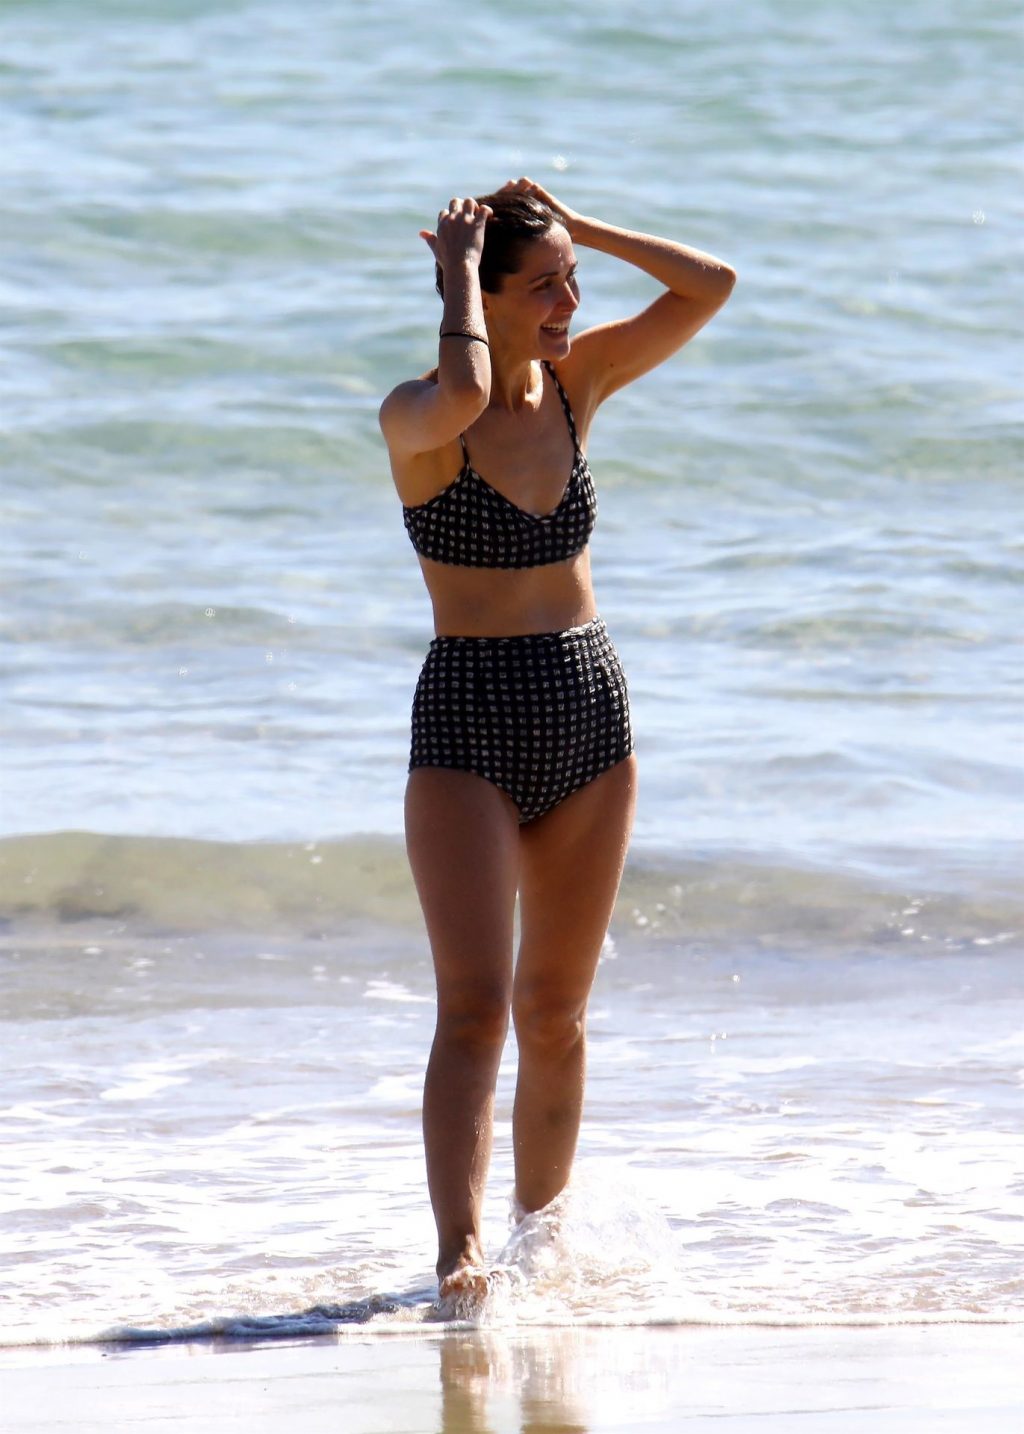 Rose Byrne Puts Her Fit Figure on Display in a Bikini in Byron Bay (26 Photos)